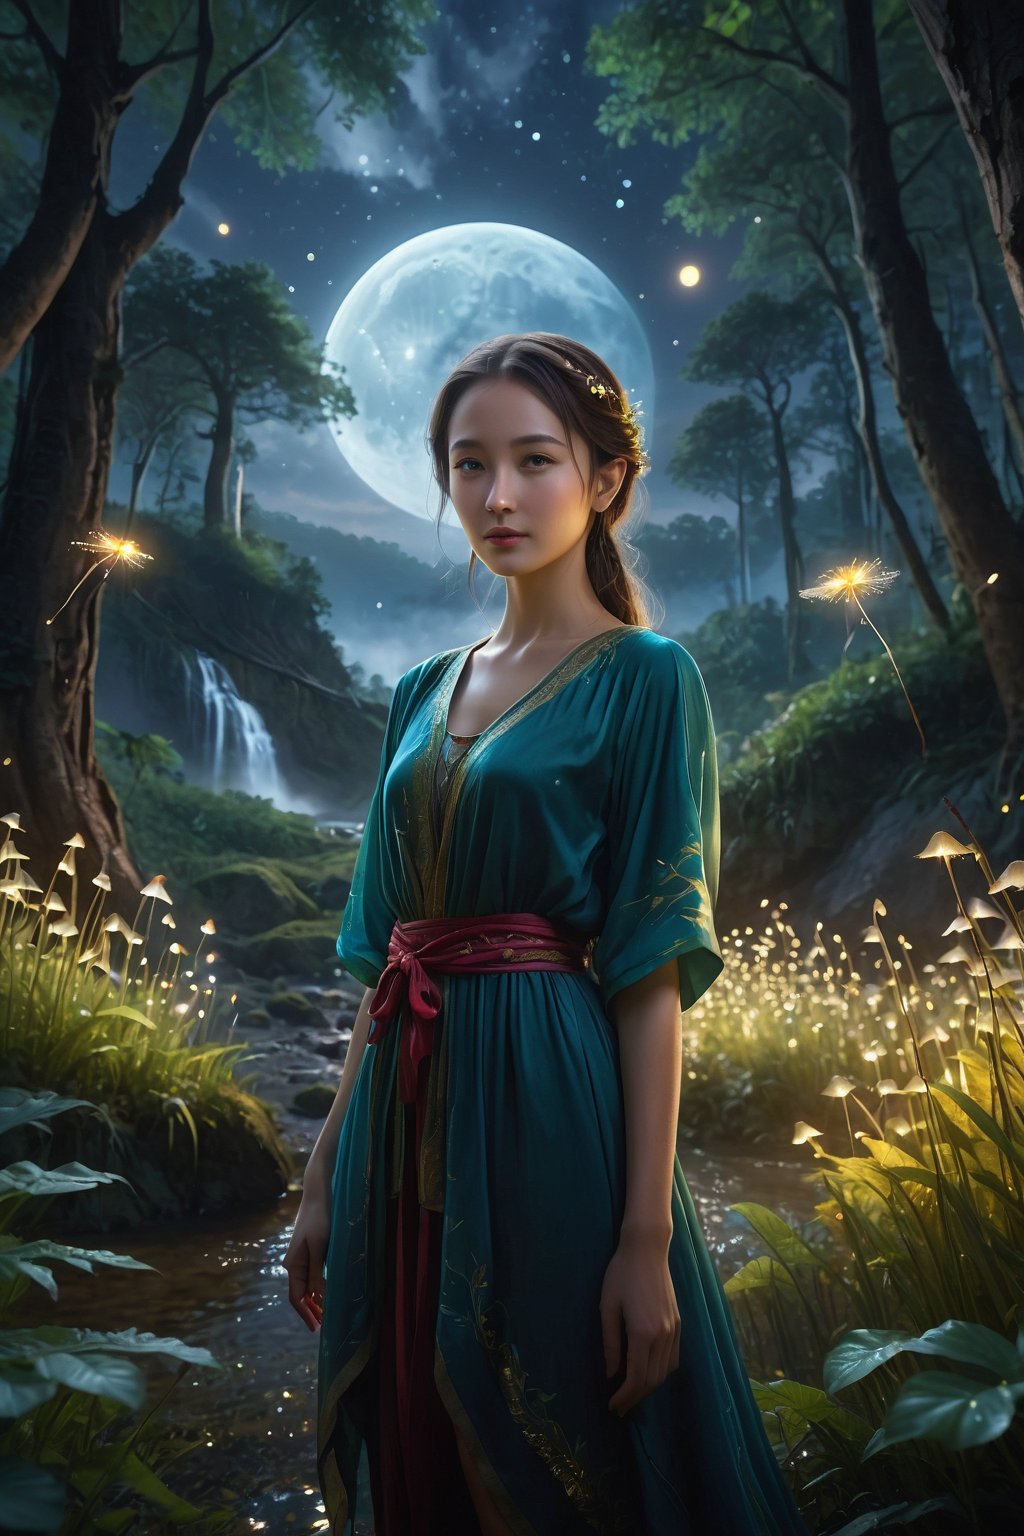 score_9, score_8_up, score_7_up, score_6_up, 
Magic Forest, No one's background, Night sky, moon, fireflies, waterfalls, magic elves, 
(Masterpiece, Best Quality, 8k:1.2), (Ultra-Detailed, Highres, Extremely Detailed, Absurdres, Incredibly Absurdres, Huge Filesize:1.1), (Photorealistic:1.3), By Futurevolab, Portrait, Ultra-Realistic Illustration, Digital Painting. ,Strong Backlit Particles